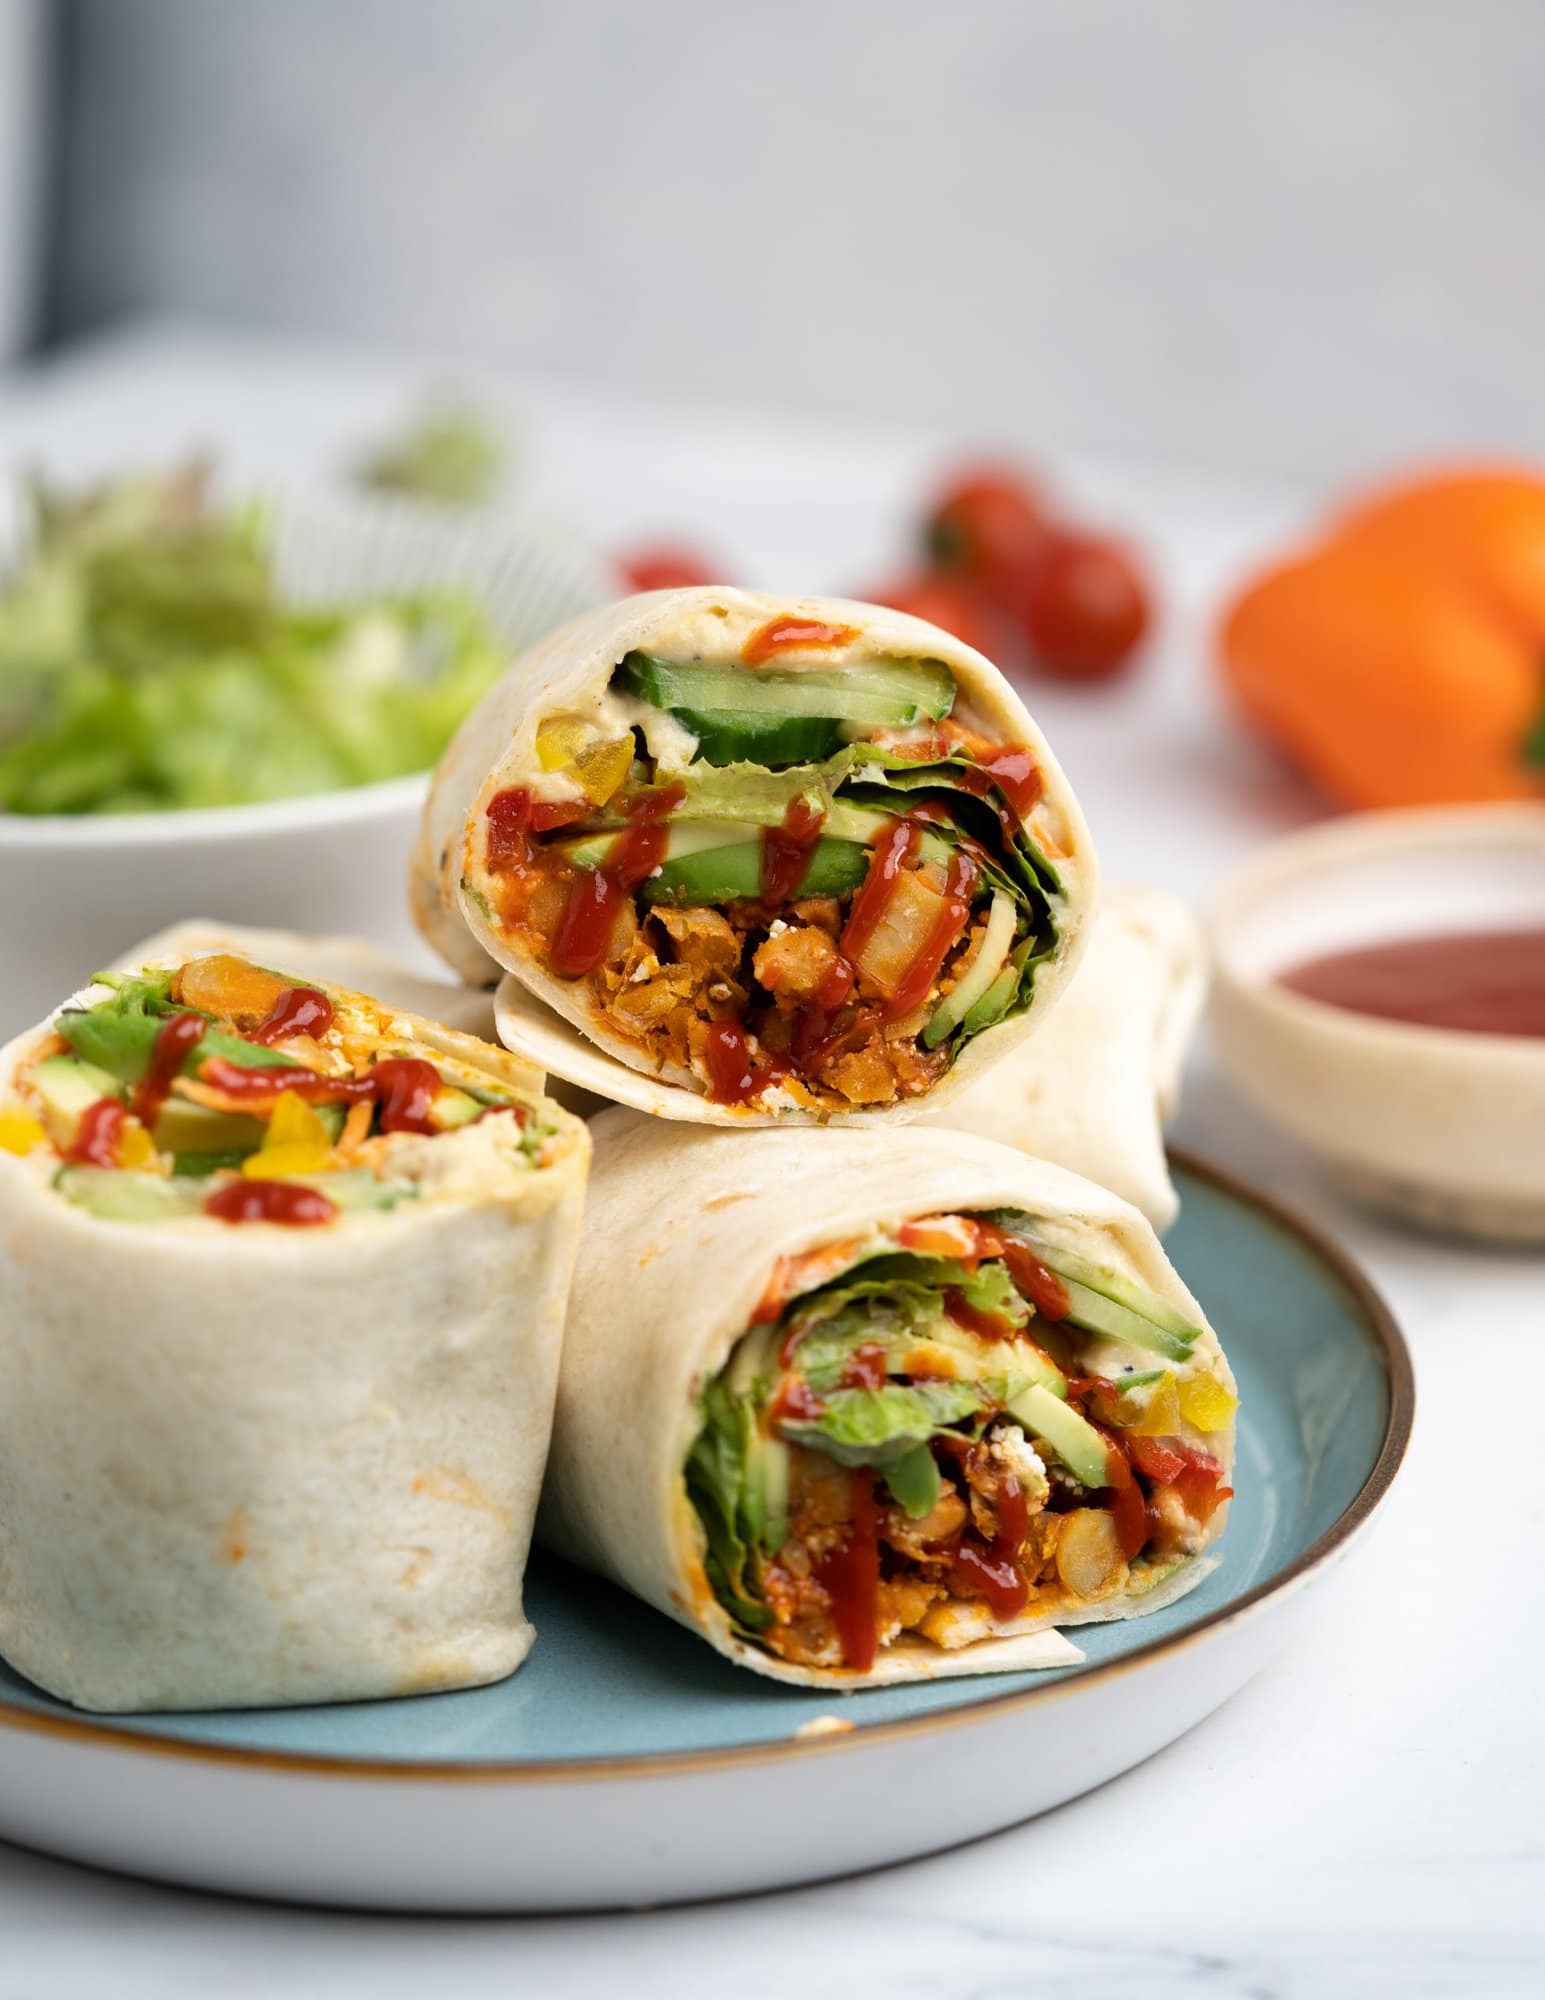 This Veggie wrap with hummus, crispy spicy chickpeas, and an array of veggies is far from boring. This is not only protein-rich, filling but also tastes delicious